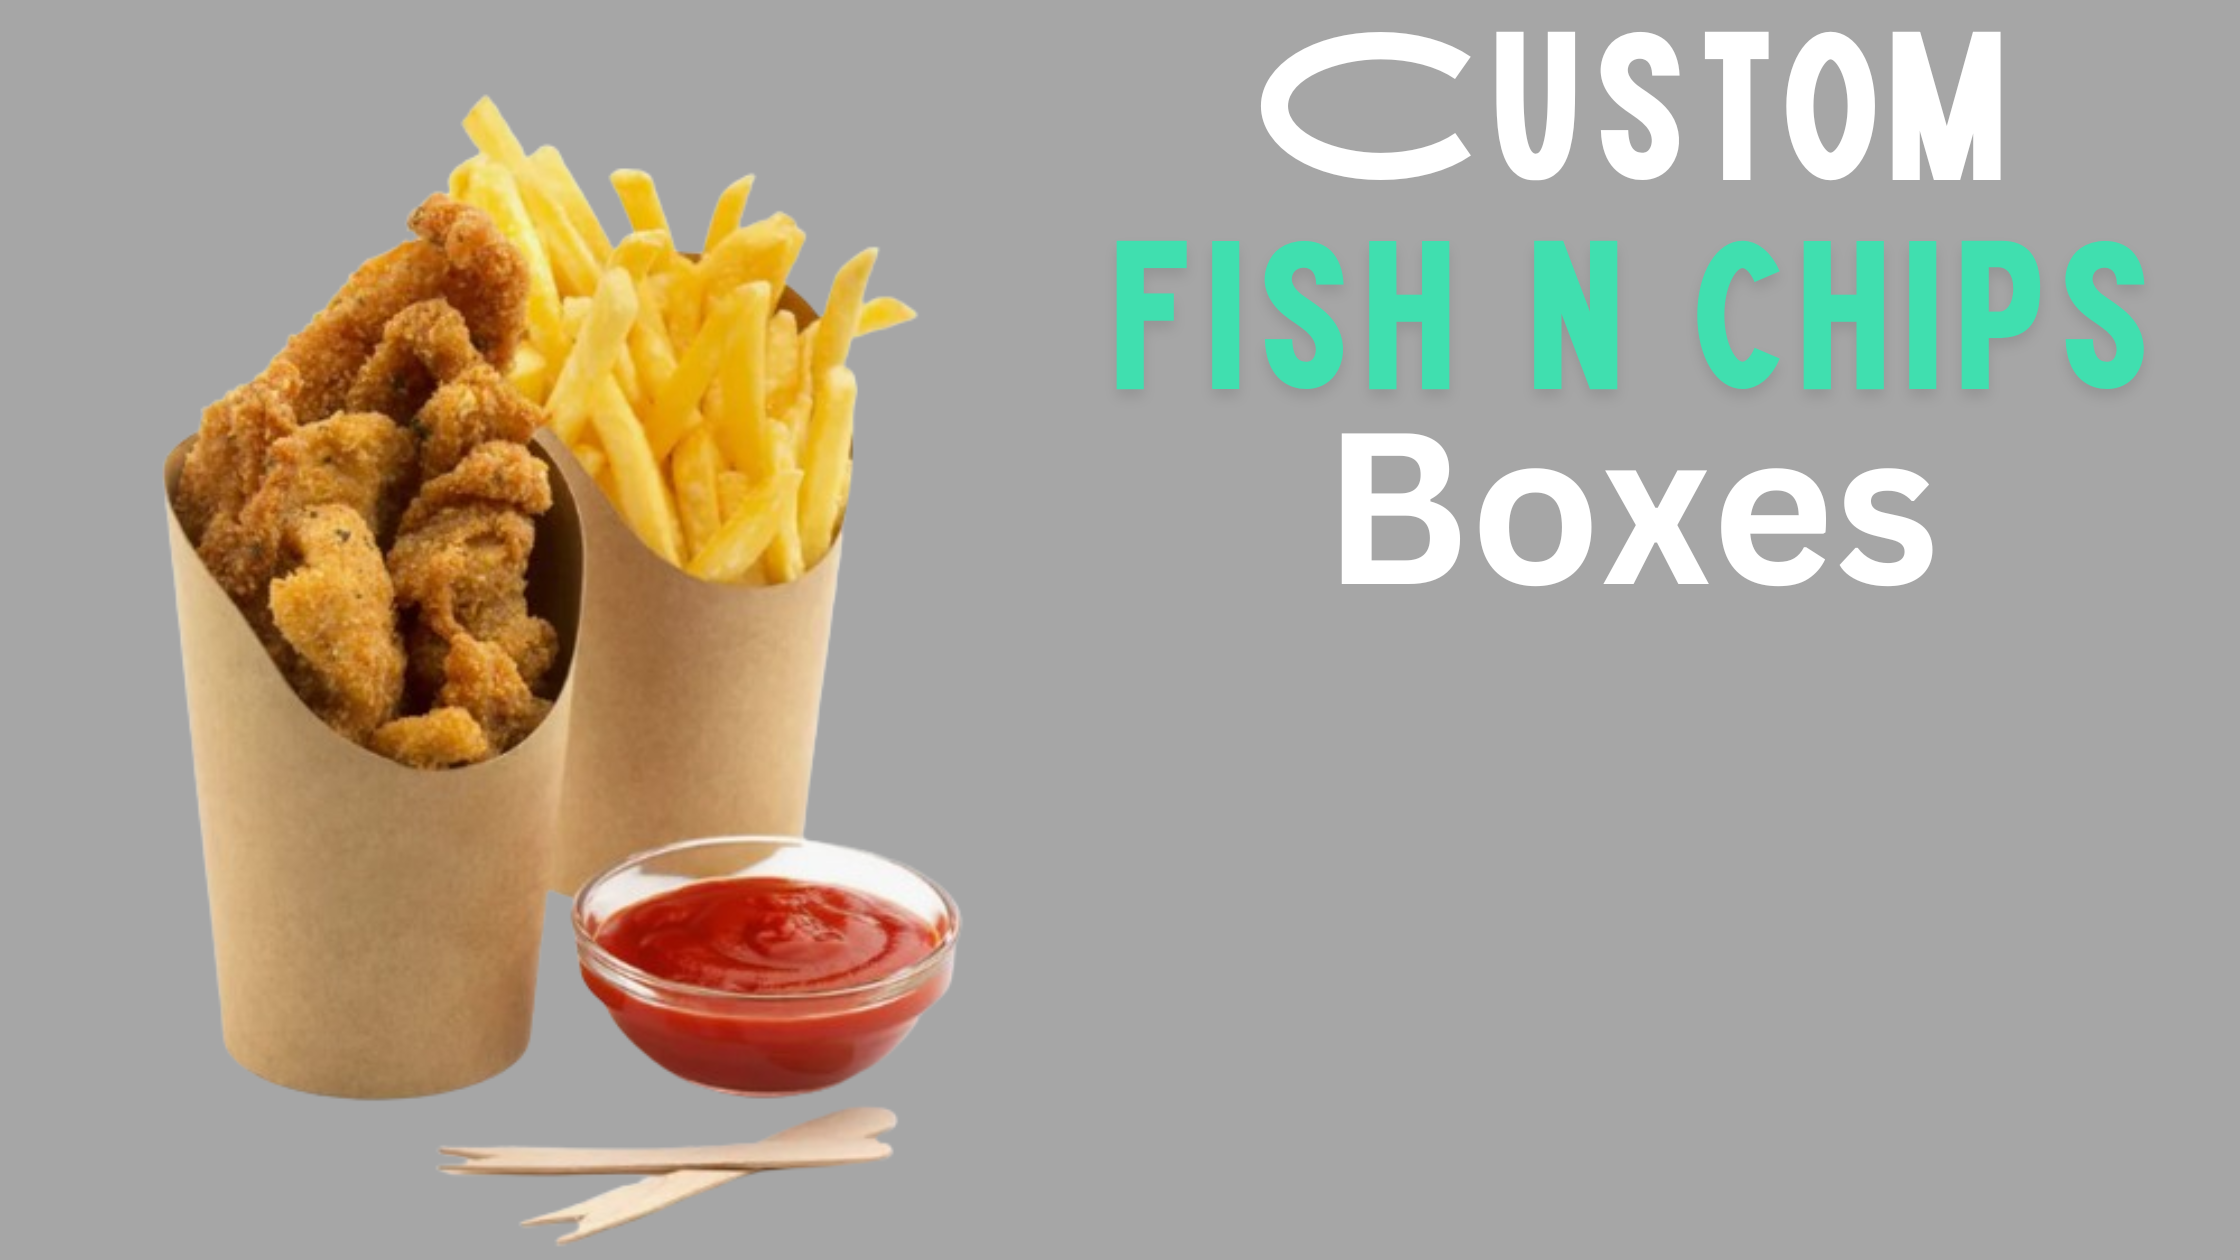 Custom fish and chips boxes